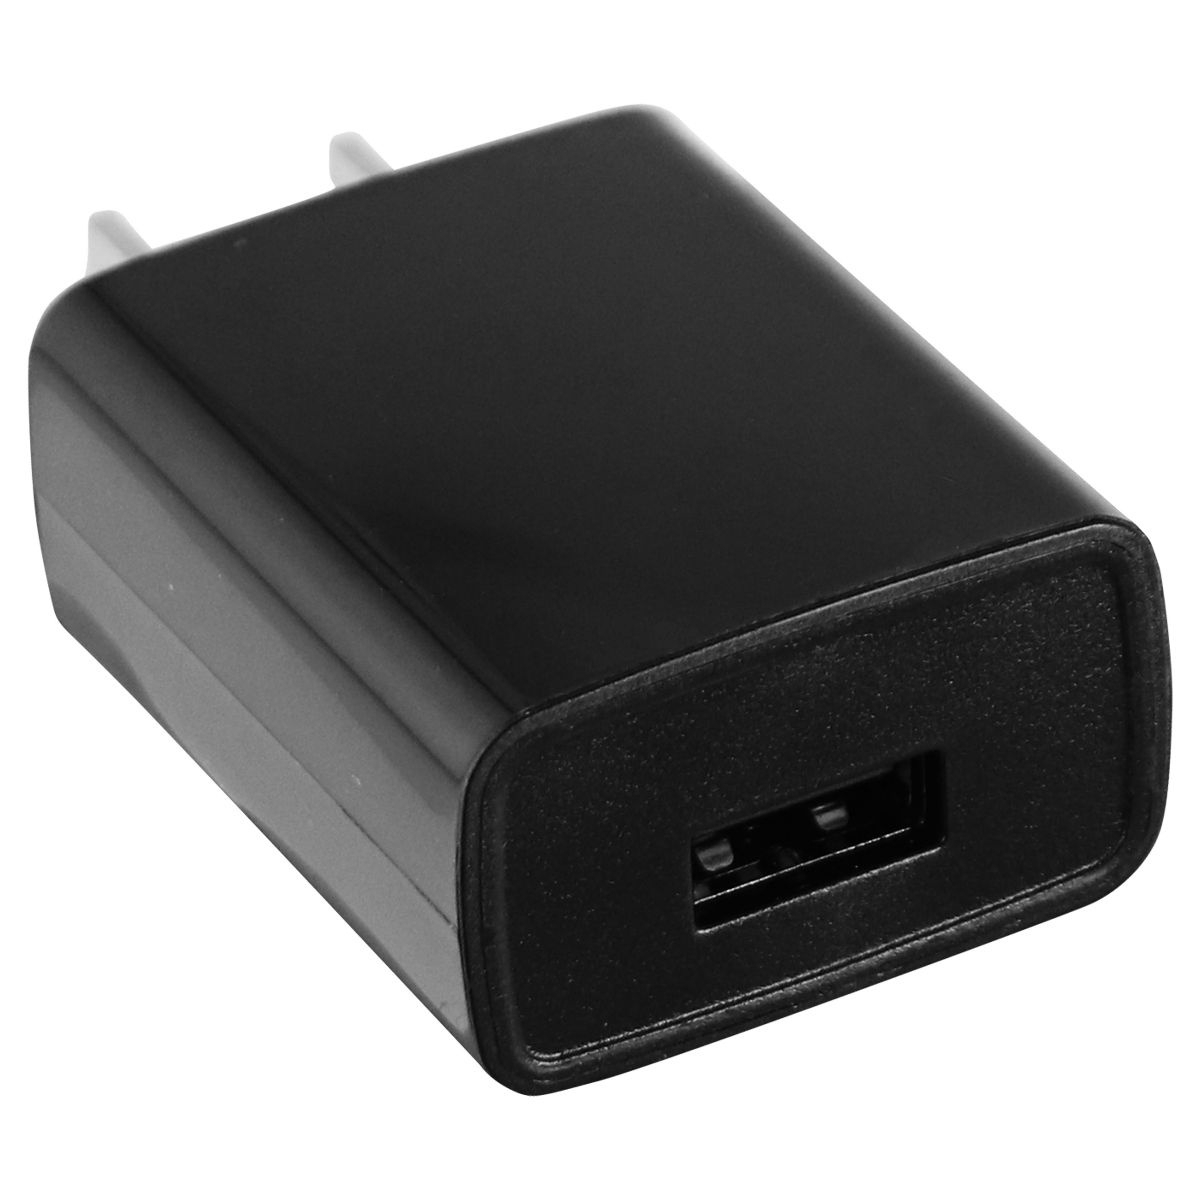 Universal 5V/2A USB Wall Charger For Smartphones & More - Black (PA-US5V2A-036)